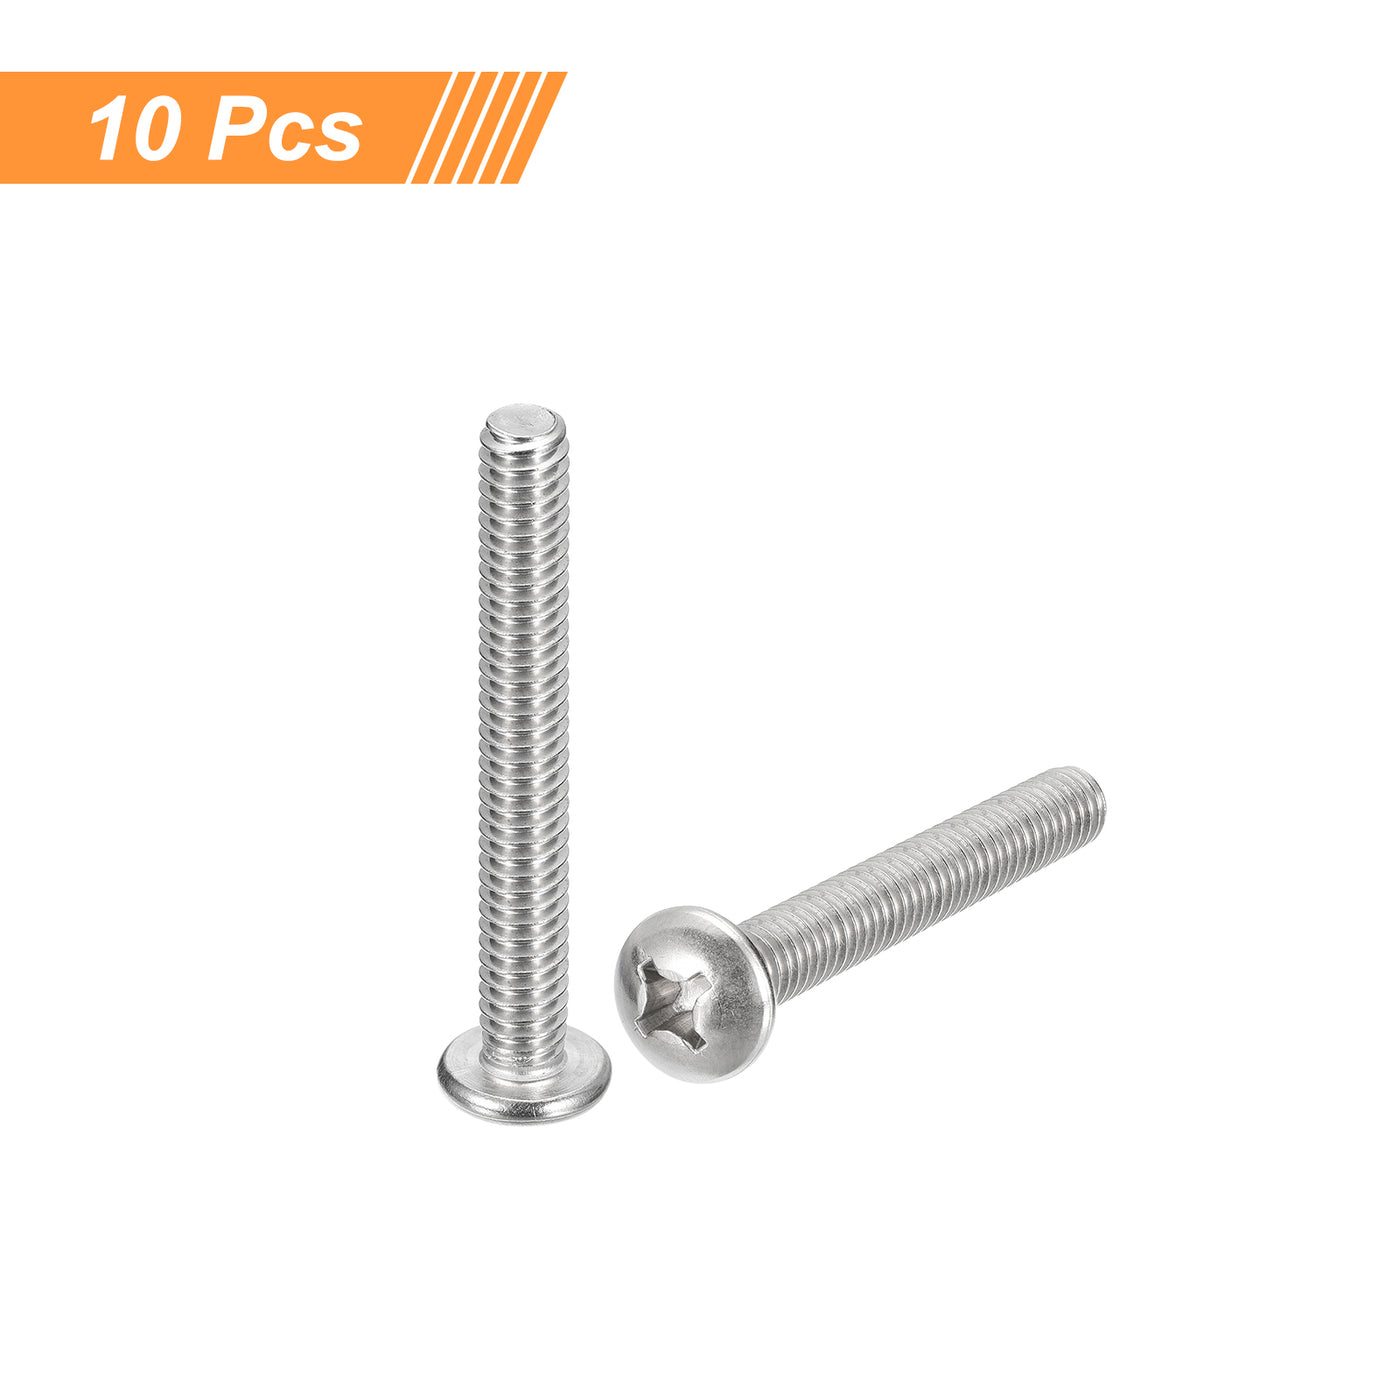 uxcell Uxcell 1/4-20x2-1/2" Pan Head Machine Screws, Stainless Steel 18-8 Screw, Pack of 10